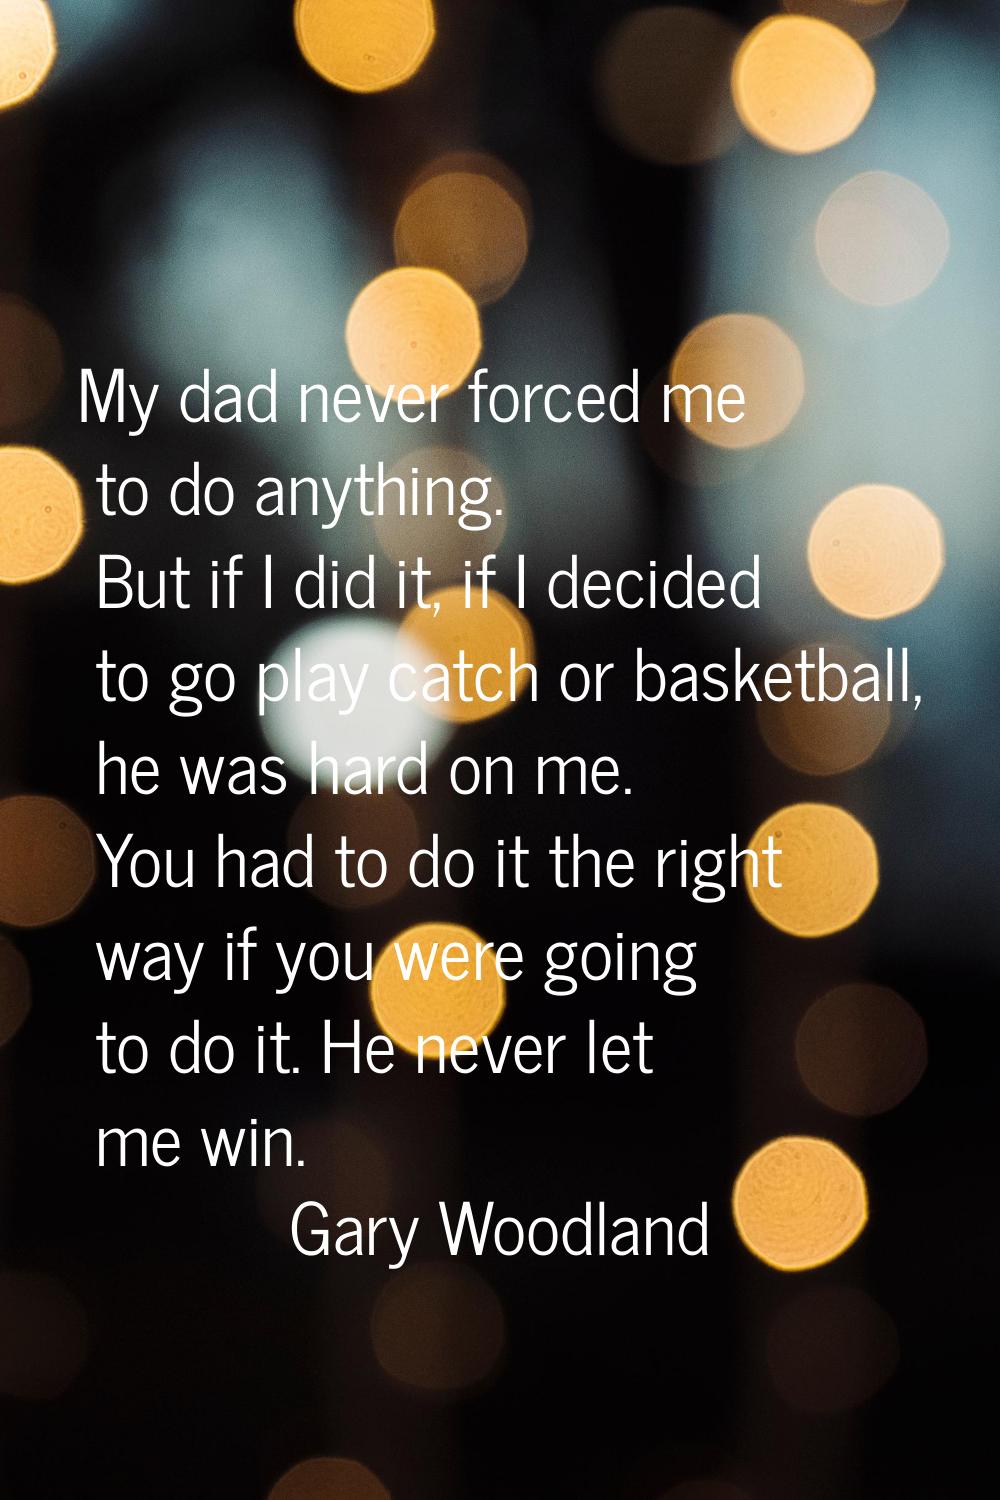 My dad never forced me to do anything. But if I did it, if I decided to go play catch or basketball